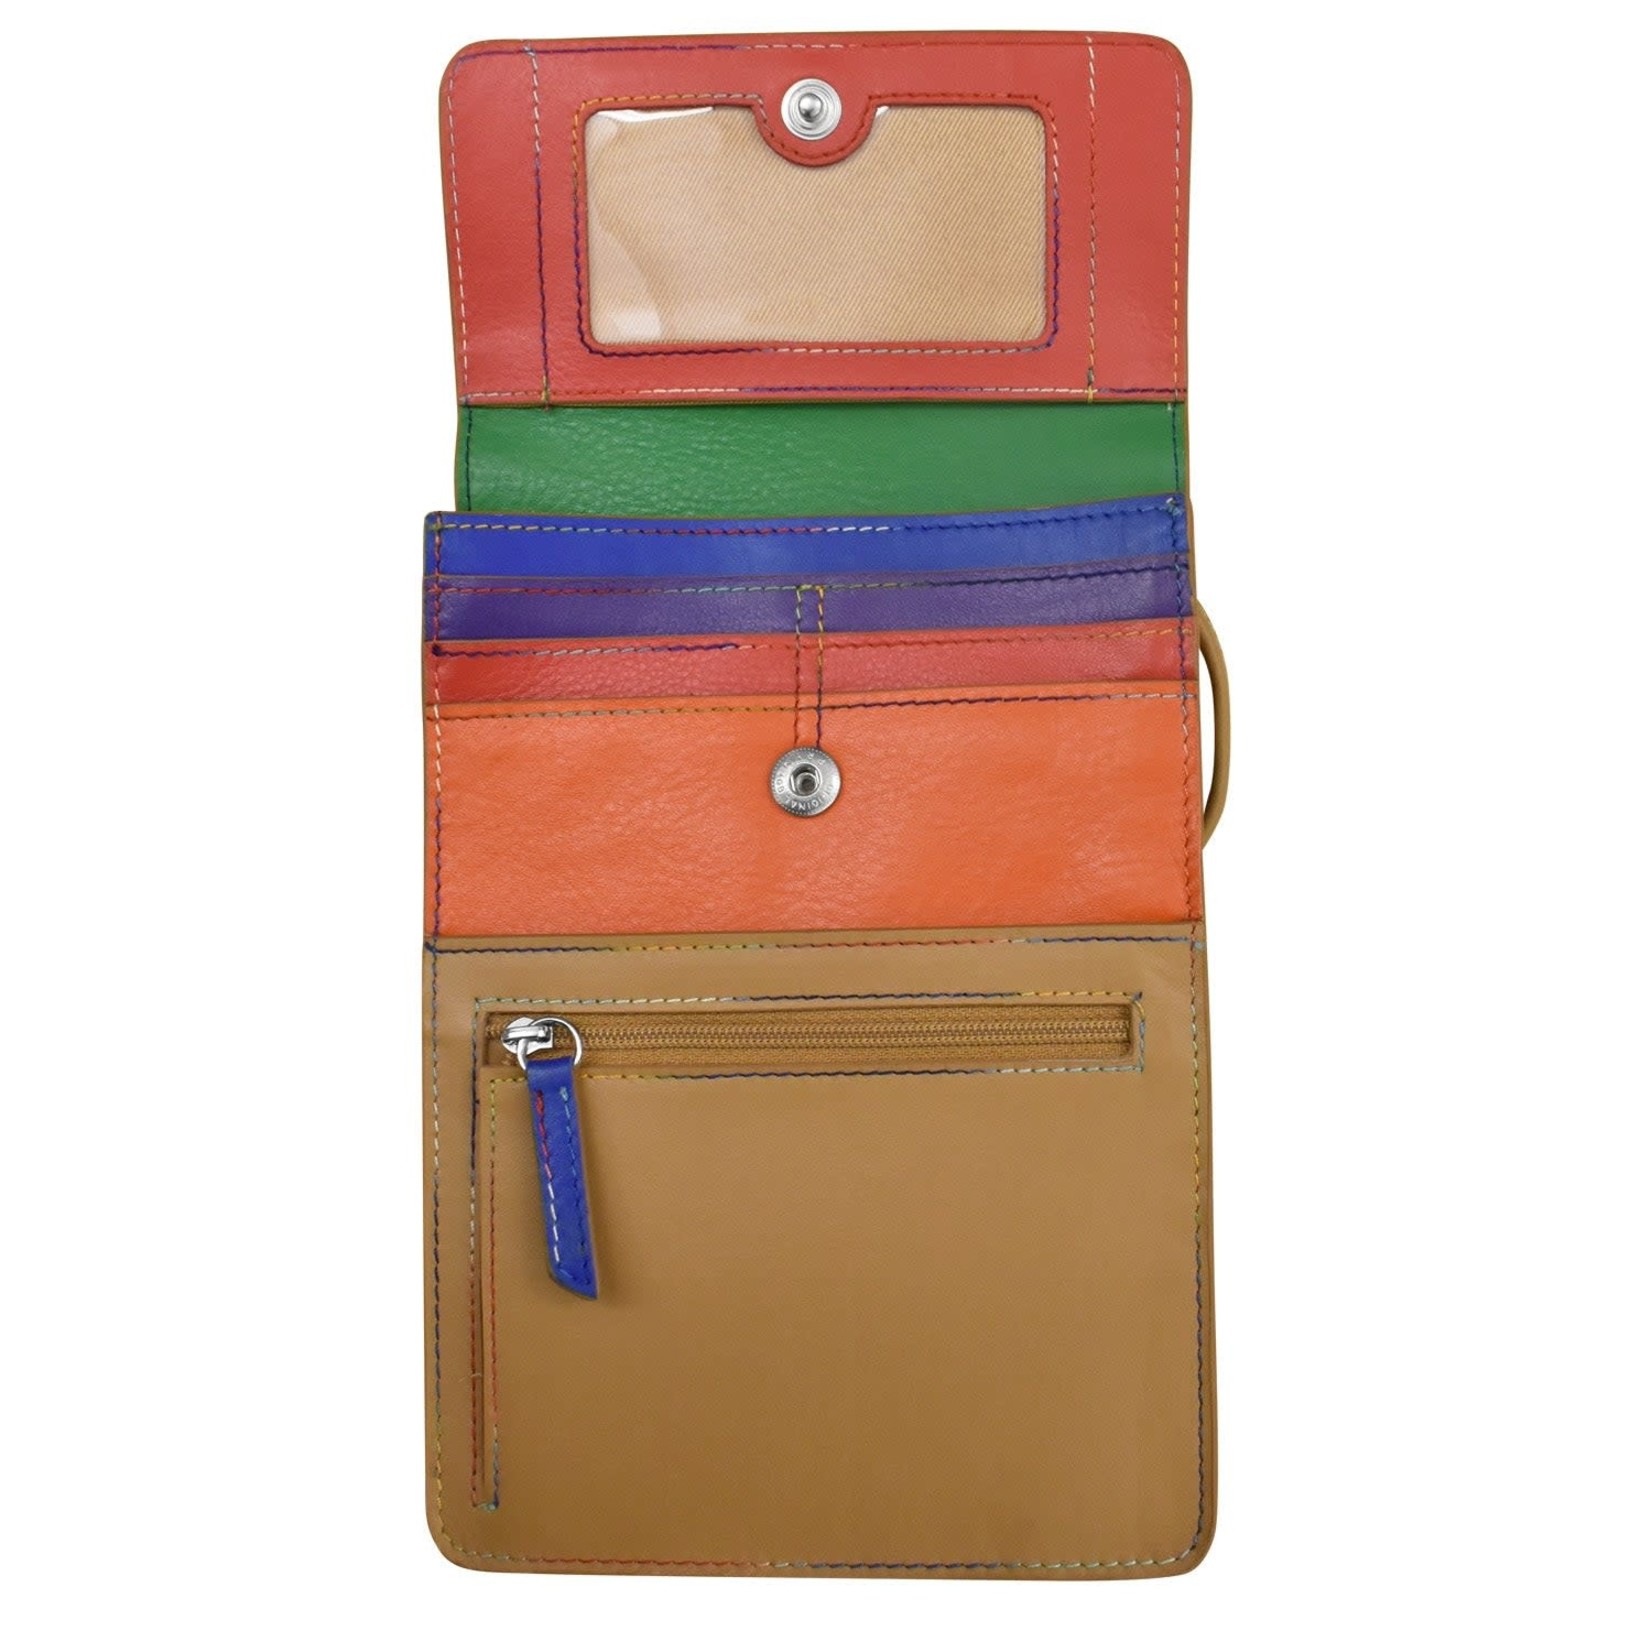 Leather Handbags and Accessories 6824 Rainbow Multi - Organizer On String